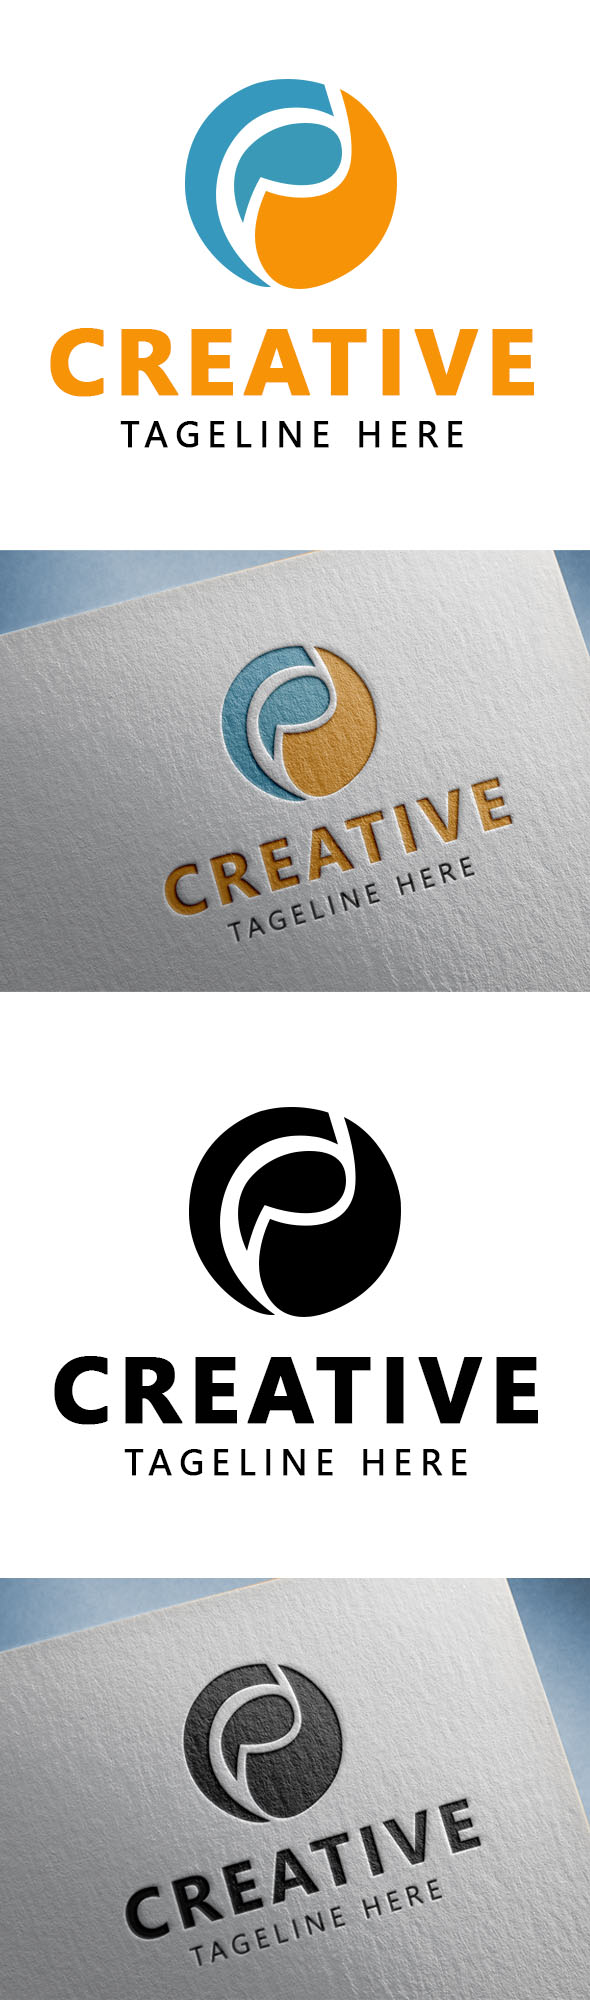 Business Logo Template for your projects.